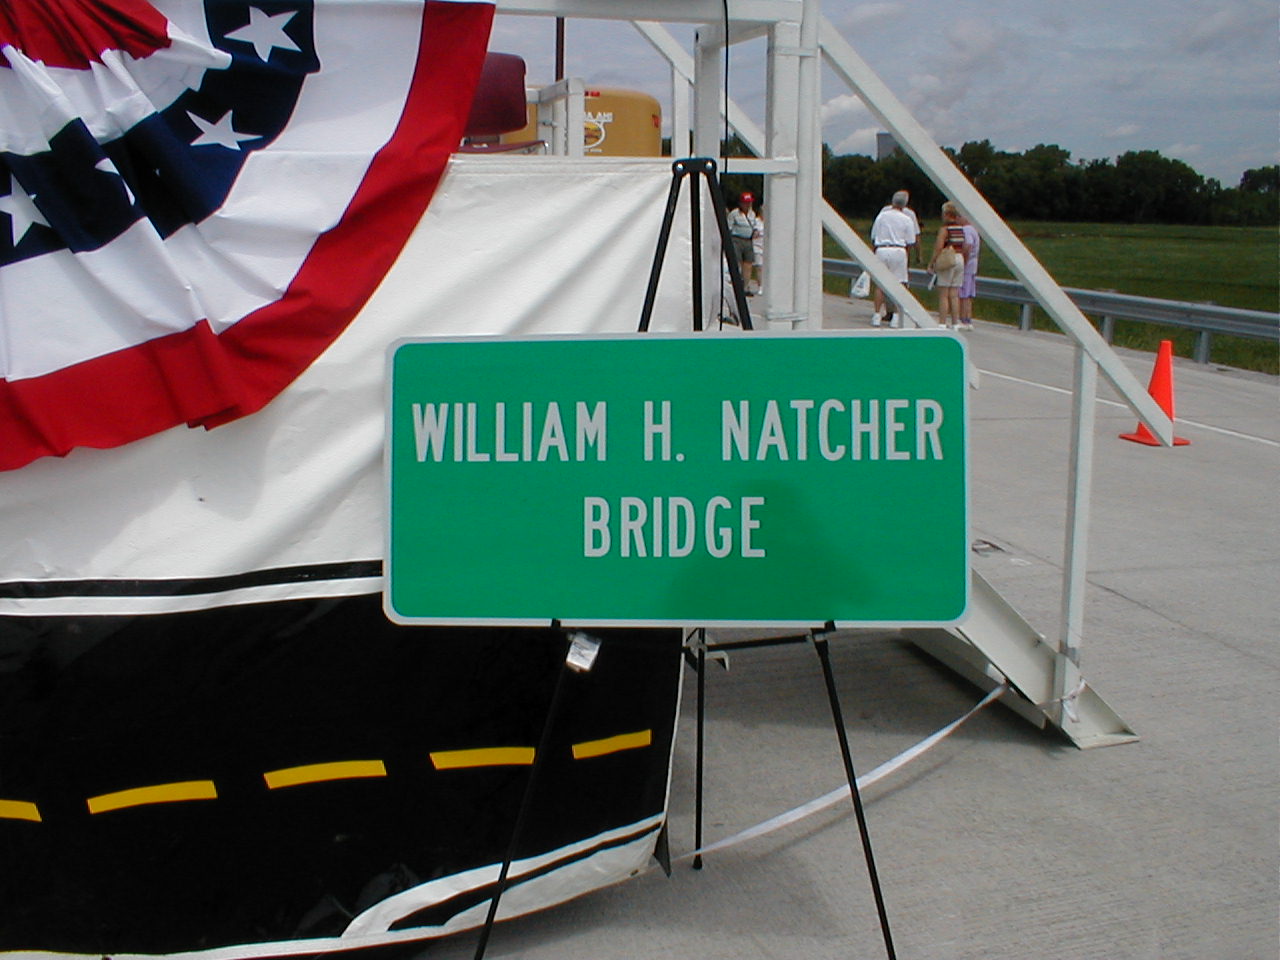 A decorative "William H. Natcher Bridge" sign on display at the ceremony's stage.